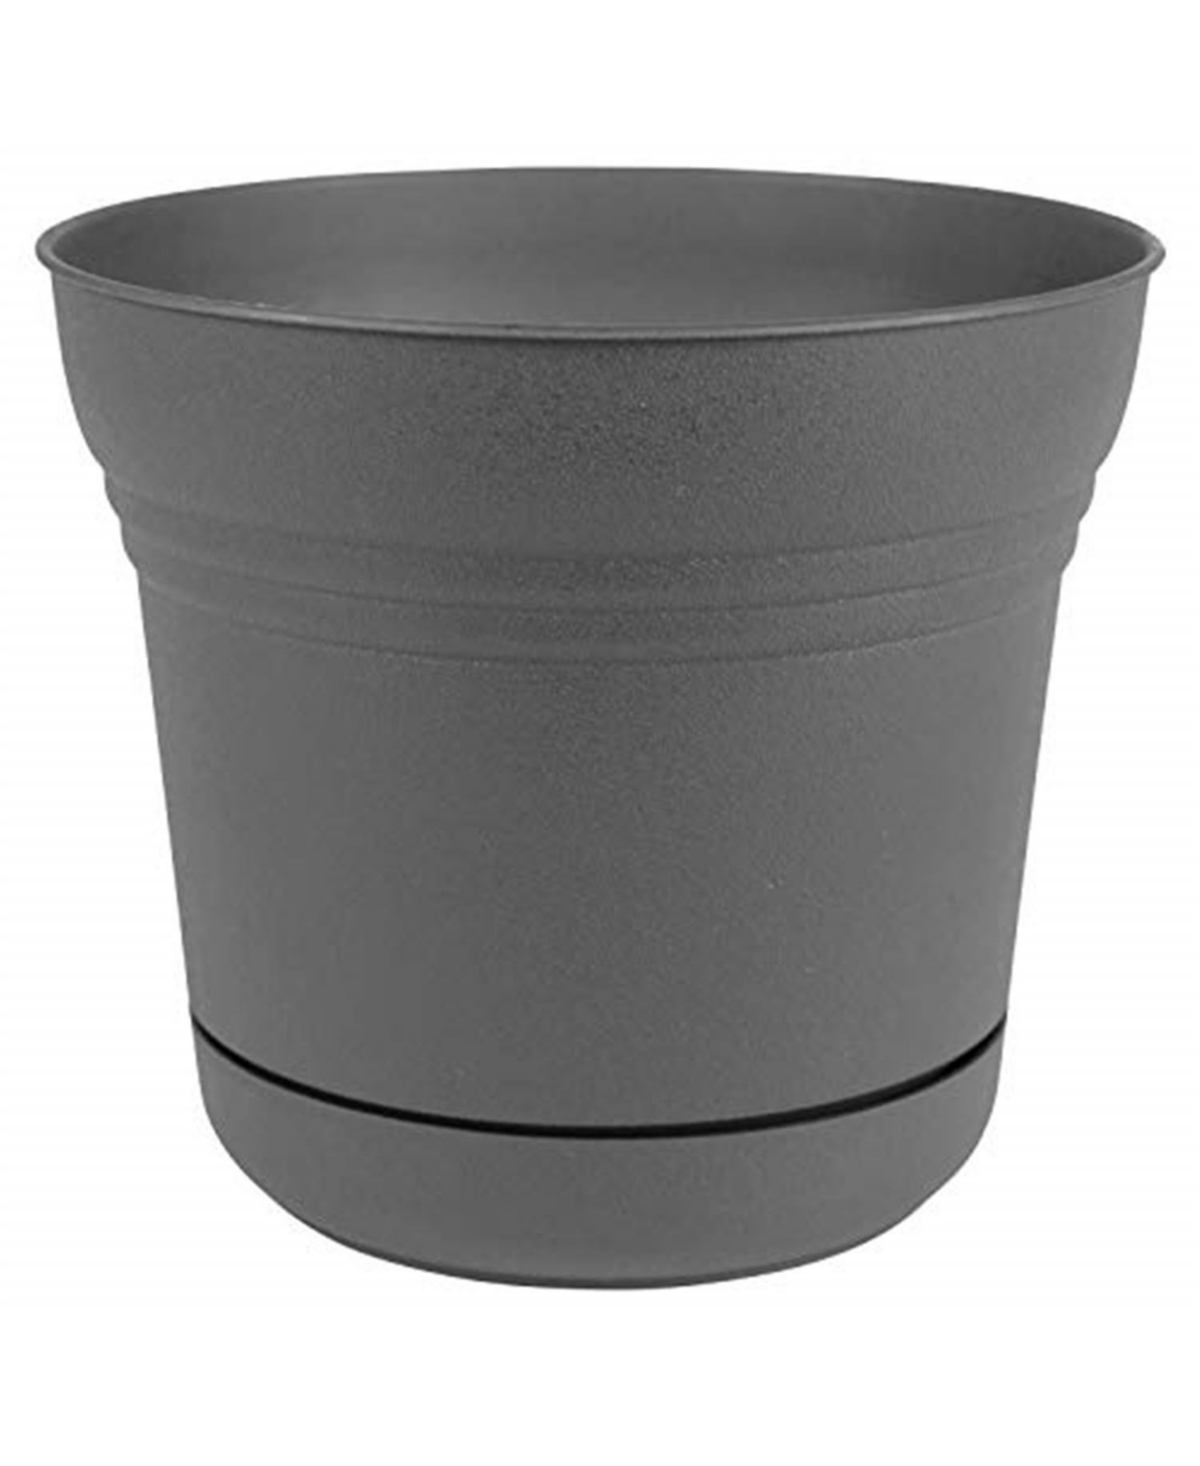 SP14908 Saturn Planter w/ Saucer 14", Charcoal - Charcoal